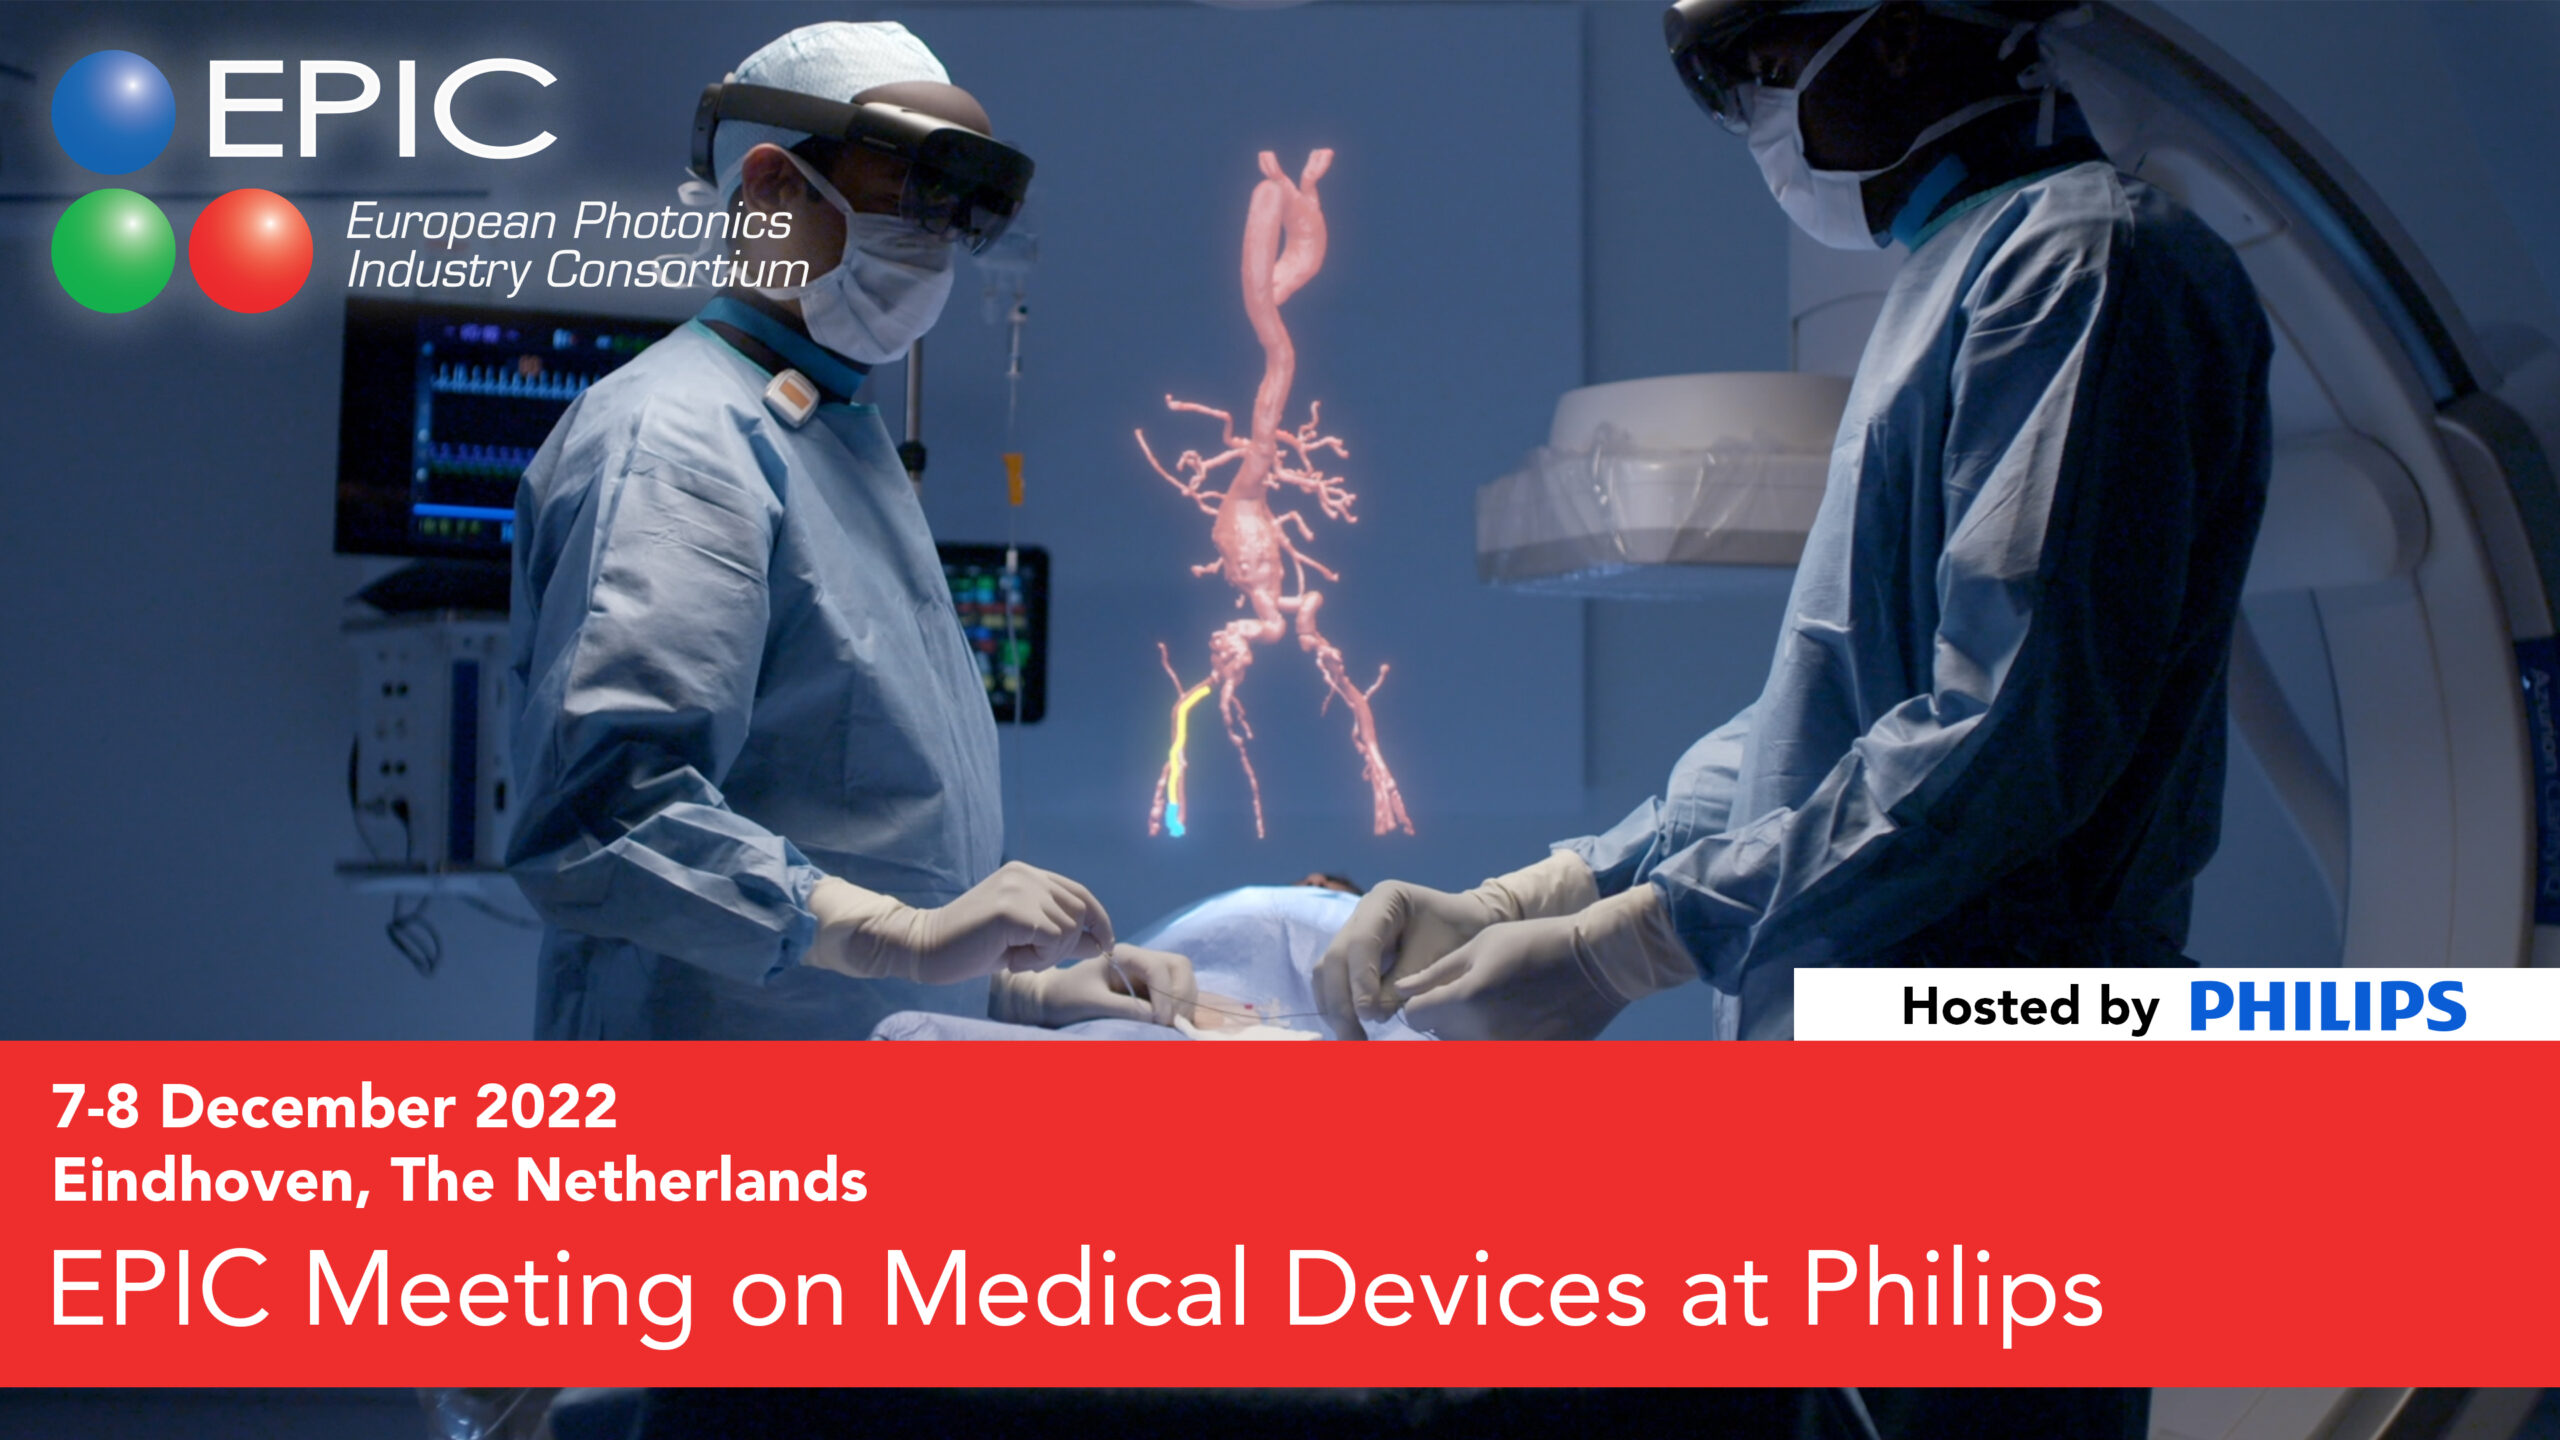 EPIC Meeting on Medical Devices at Philips